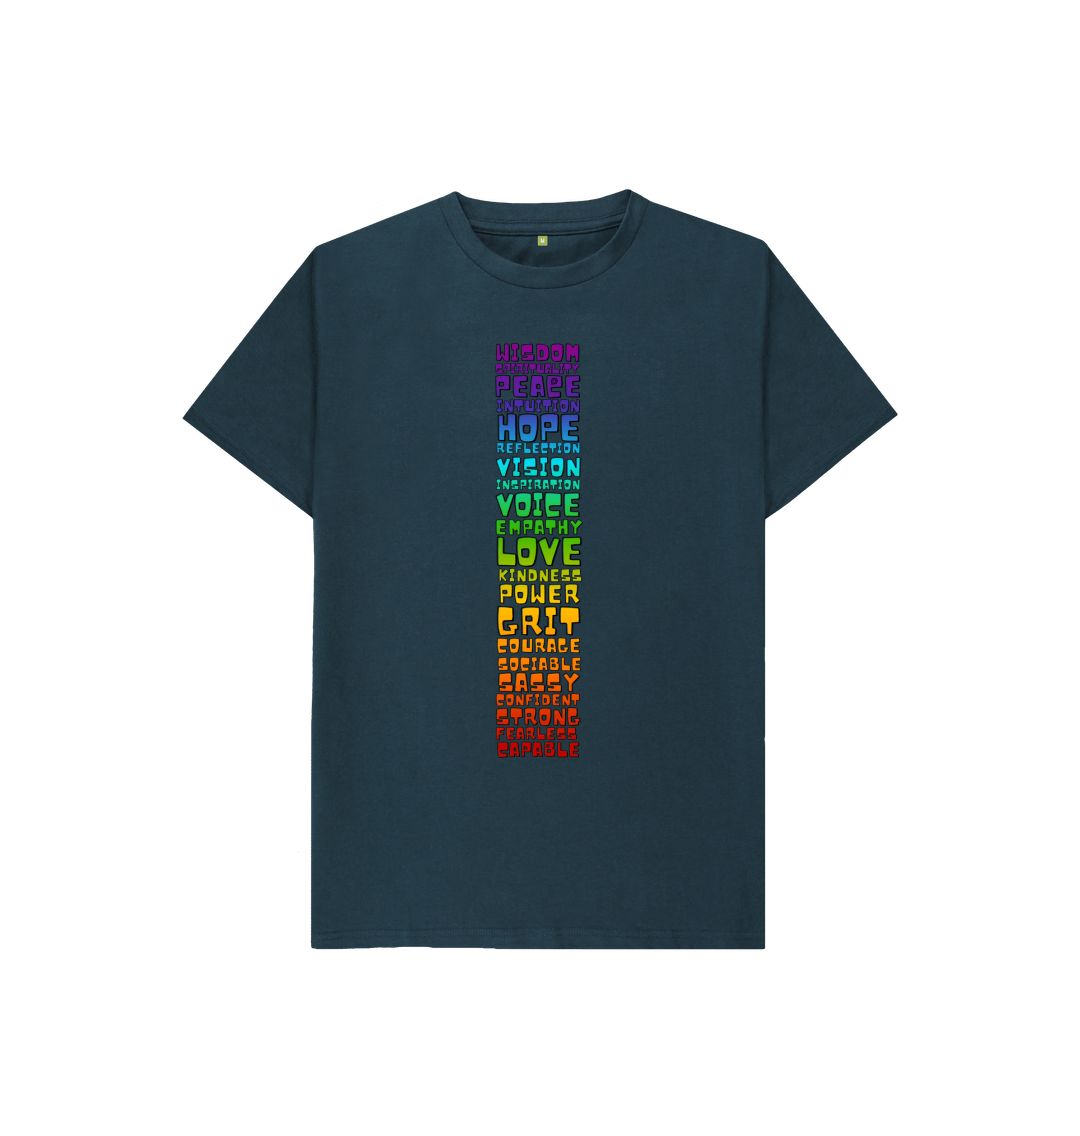 Denim Blue Youth T-shirt - Chakra Words to Empower